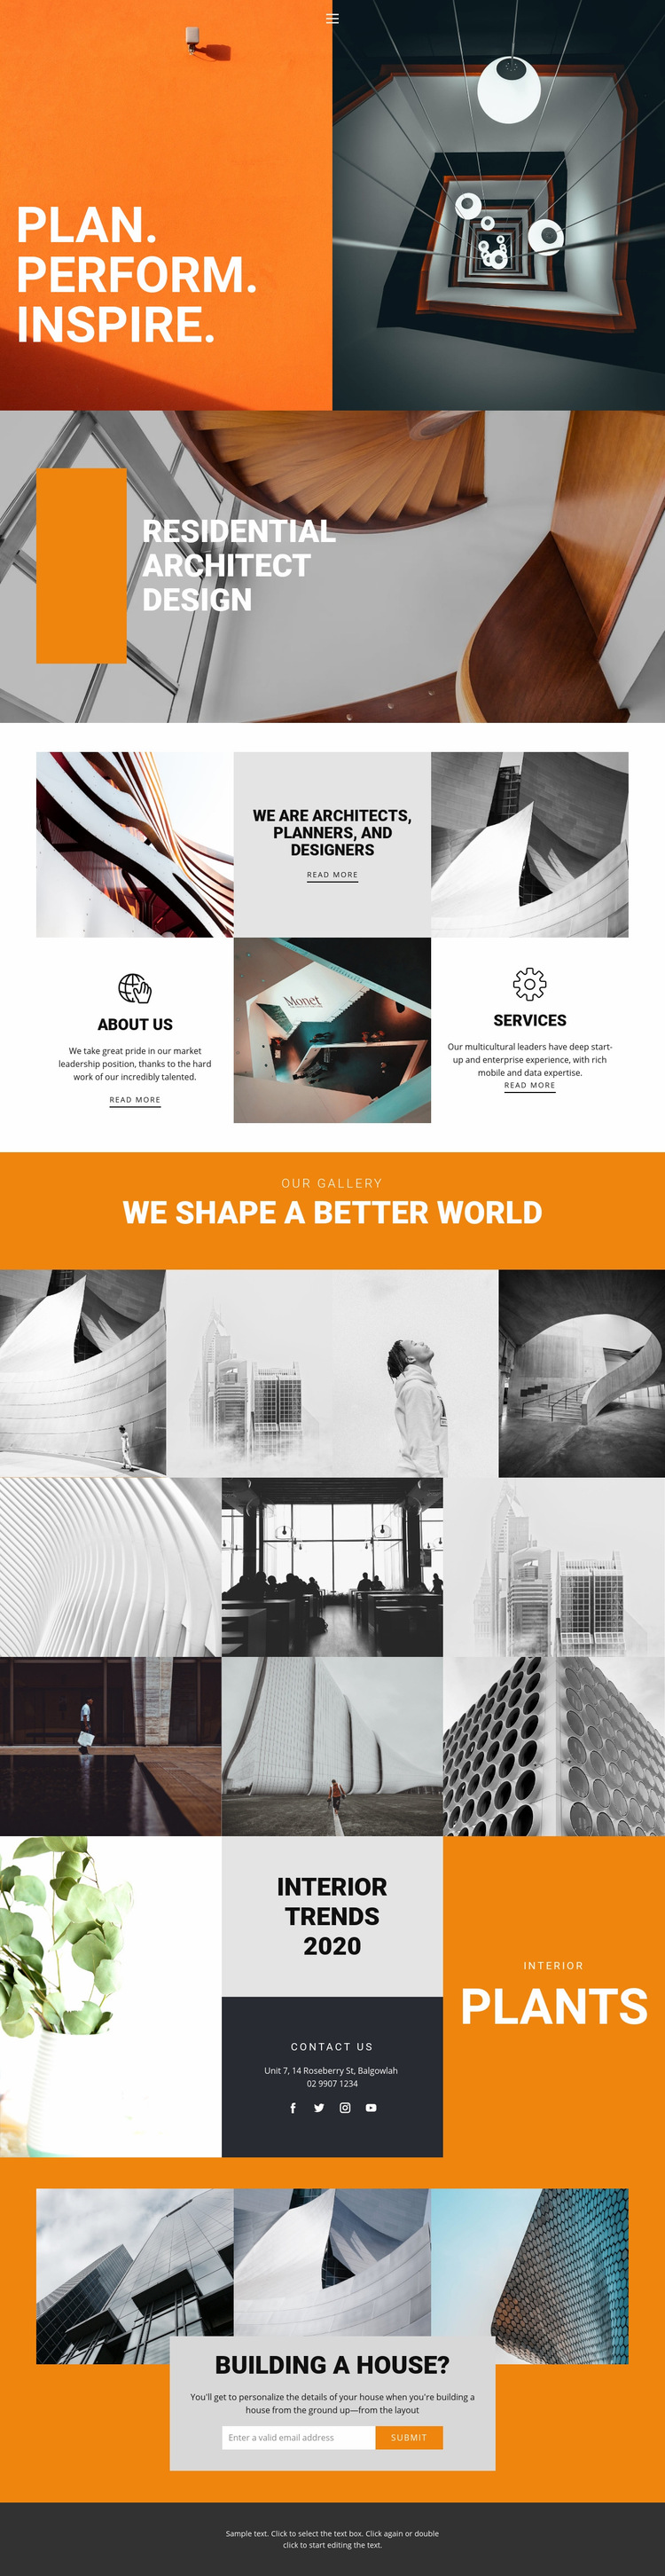 Inspiring ways of architecture Web Page Design